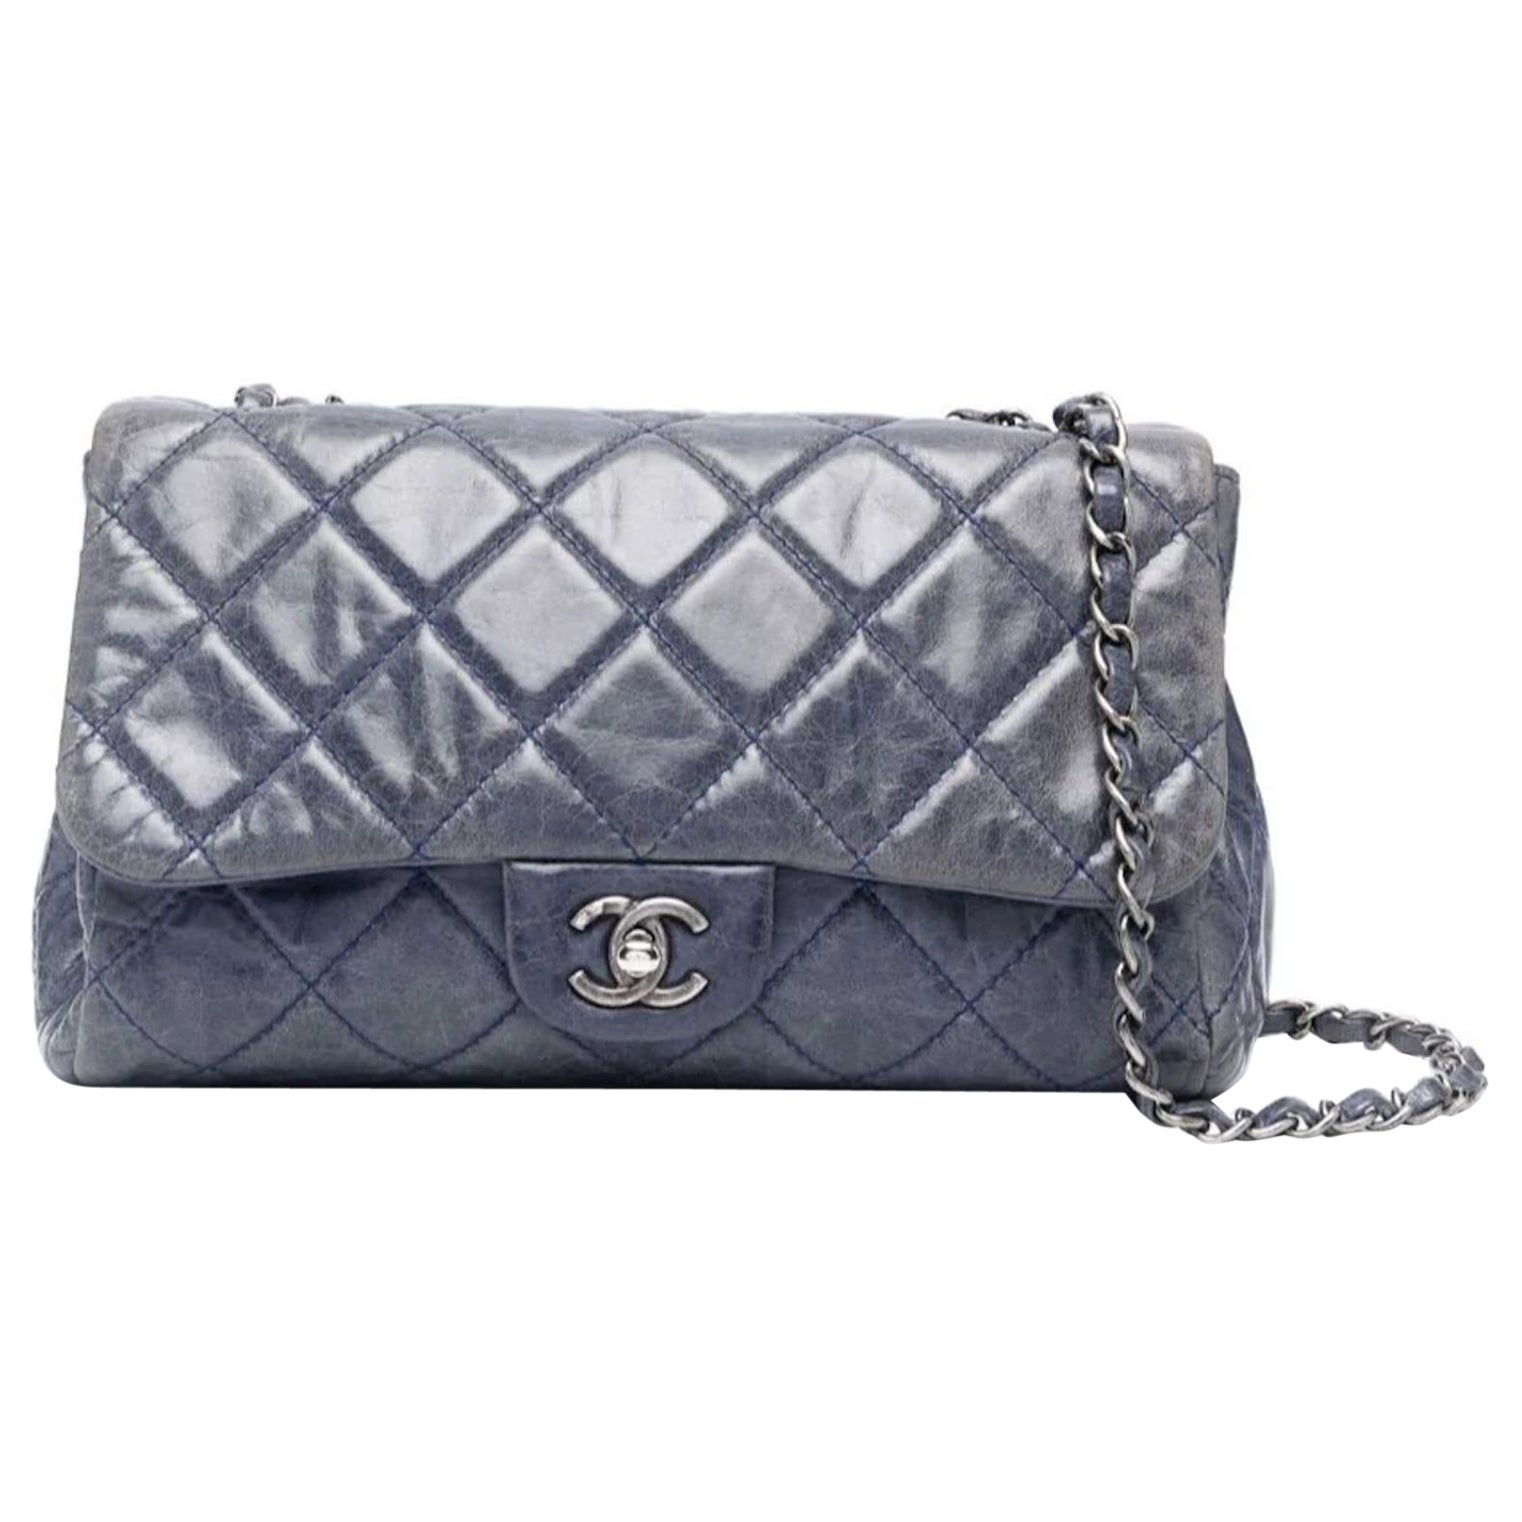 Chanel Blue Jean Leather Timeless Bag